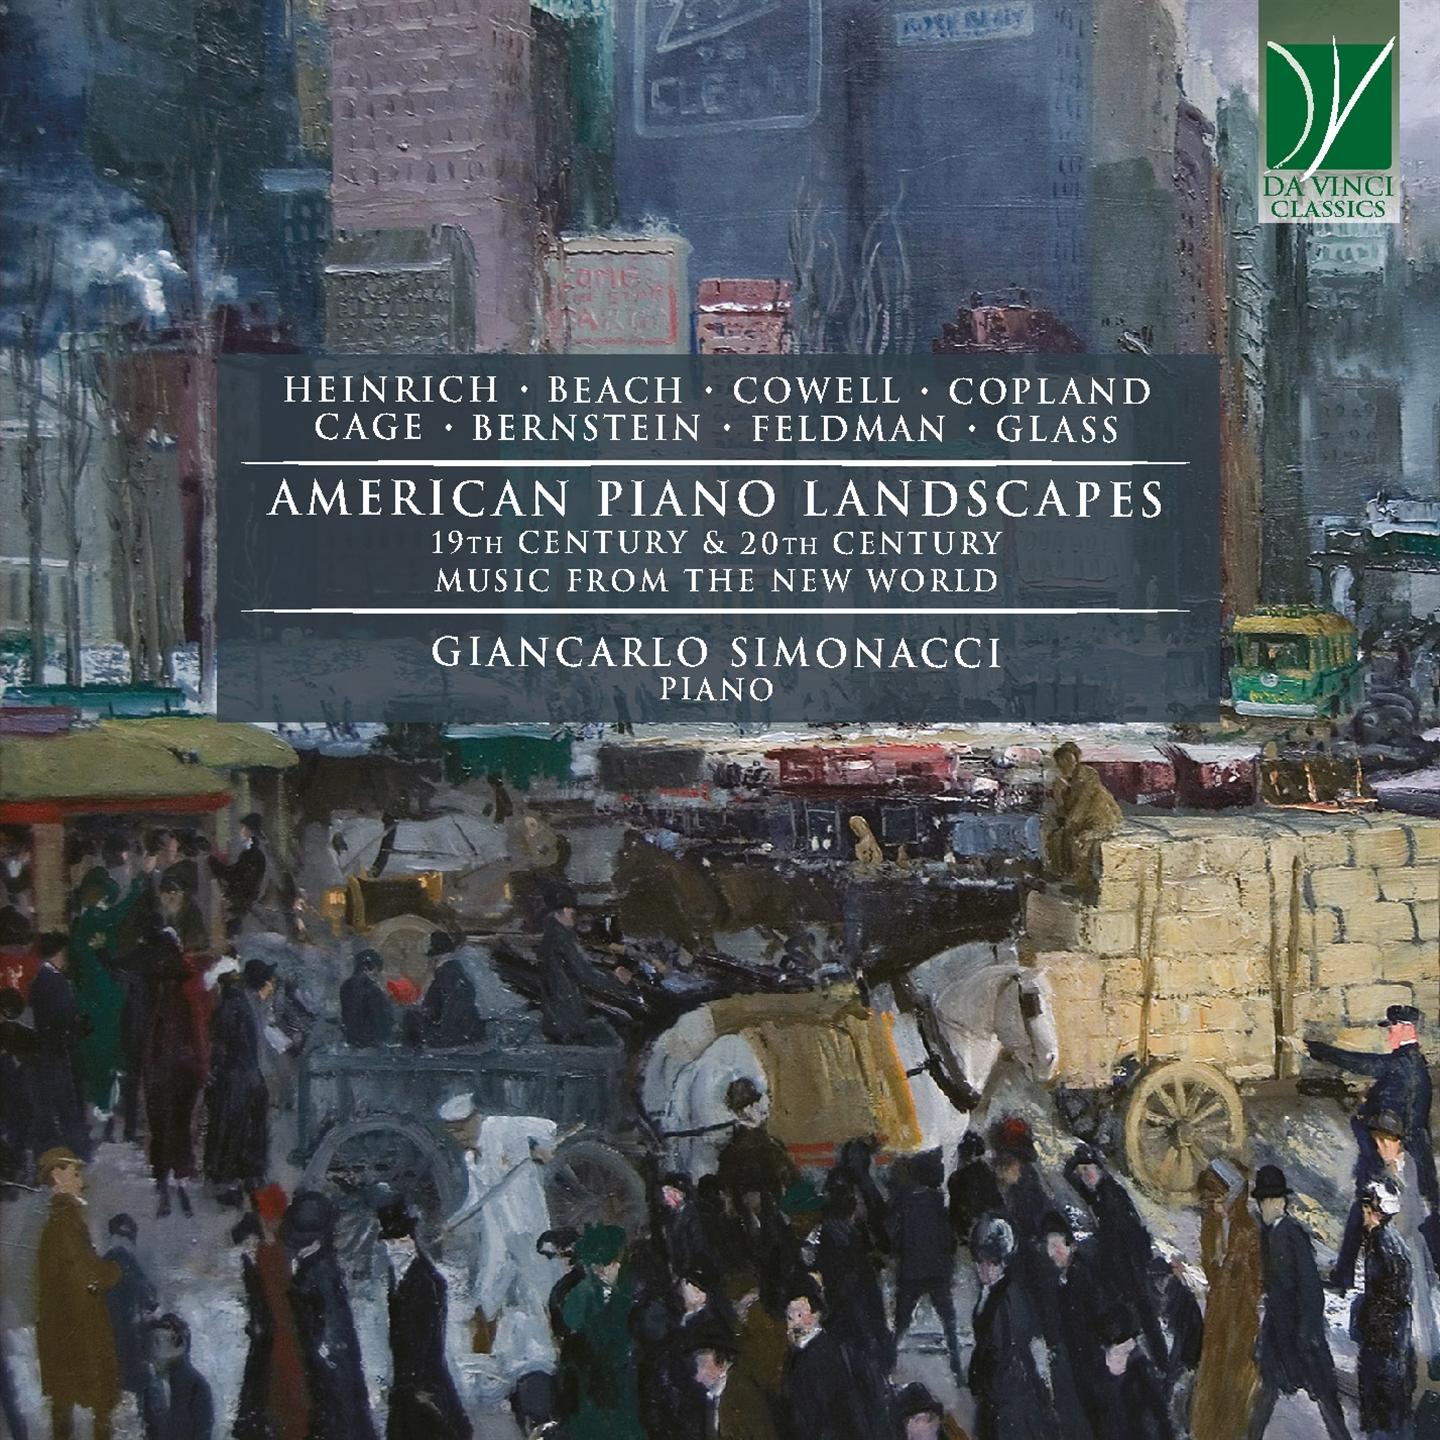 AMERICAN PIANO LANDSCAPES - 19TH CENTURY & 20TH CENTURY MUSIC FROM THE NEW WORL